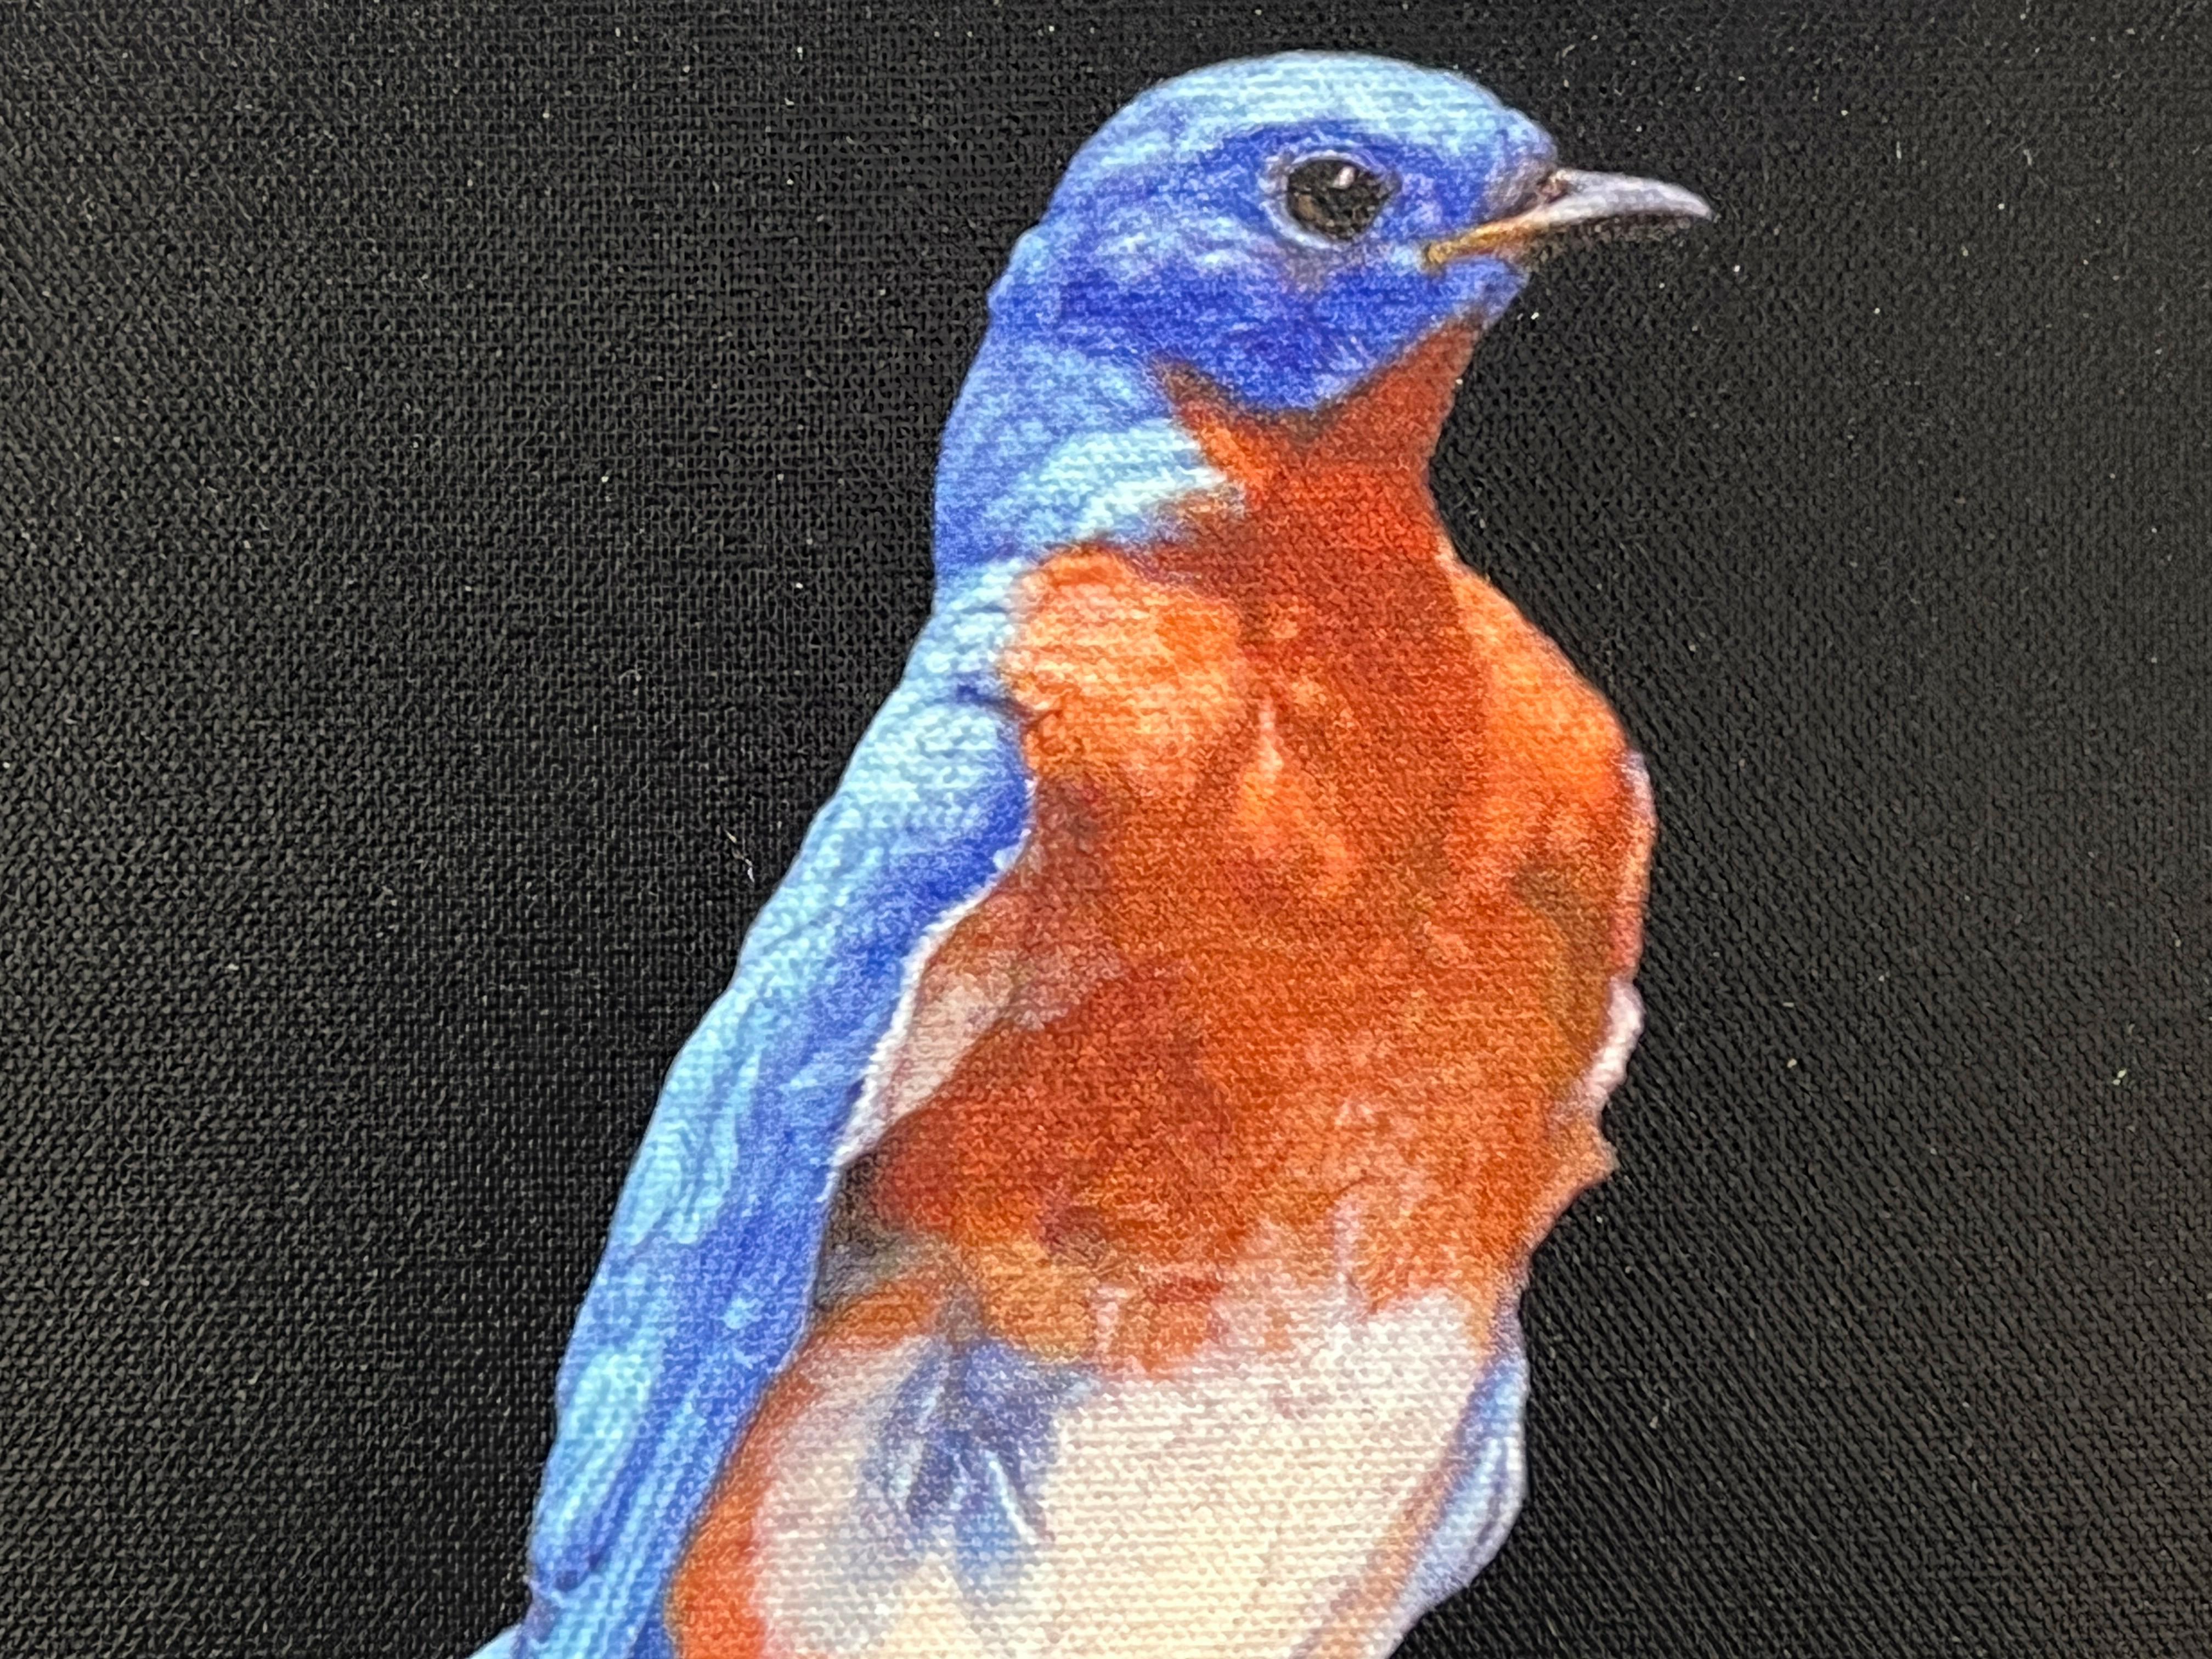 EASTERN BLUE BIRD - Contemporary / photorealism / animal print For Sale 1